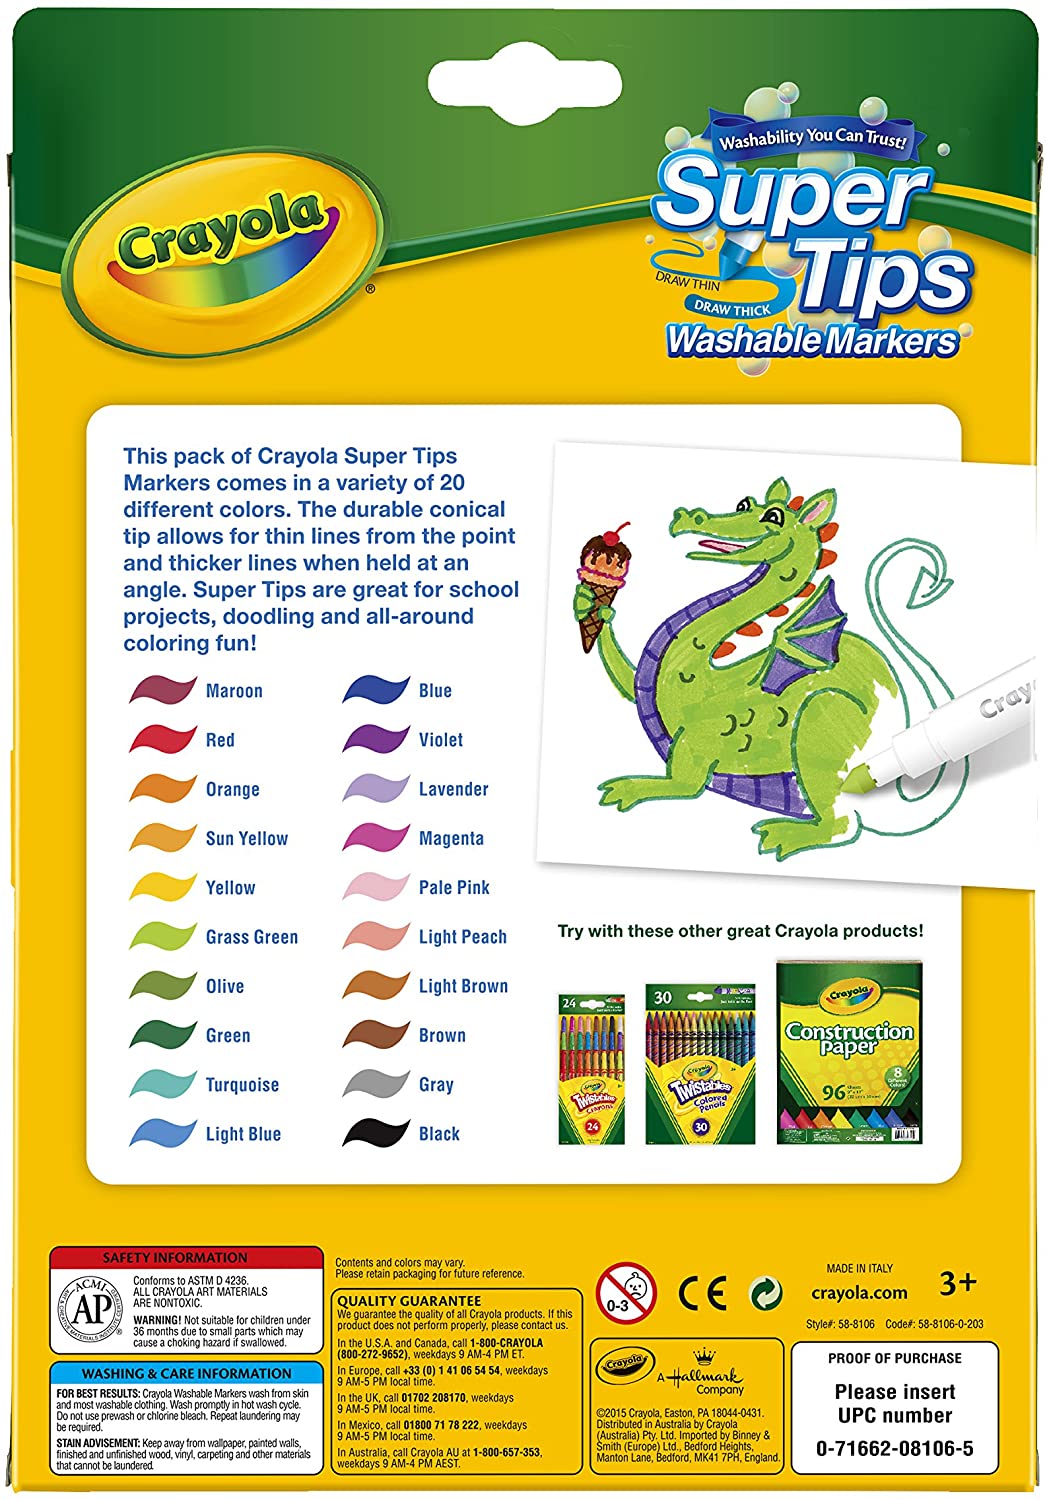 2 Packages Crayola Super Tips 20 Count Draw Thin Or Thick Washable Markers